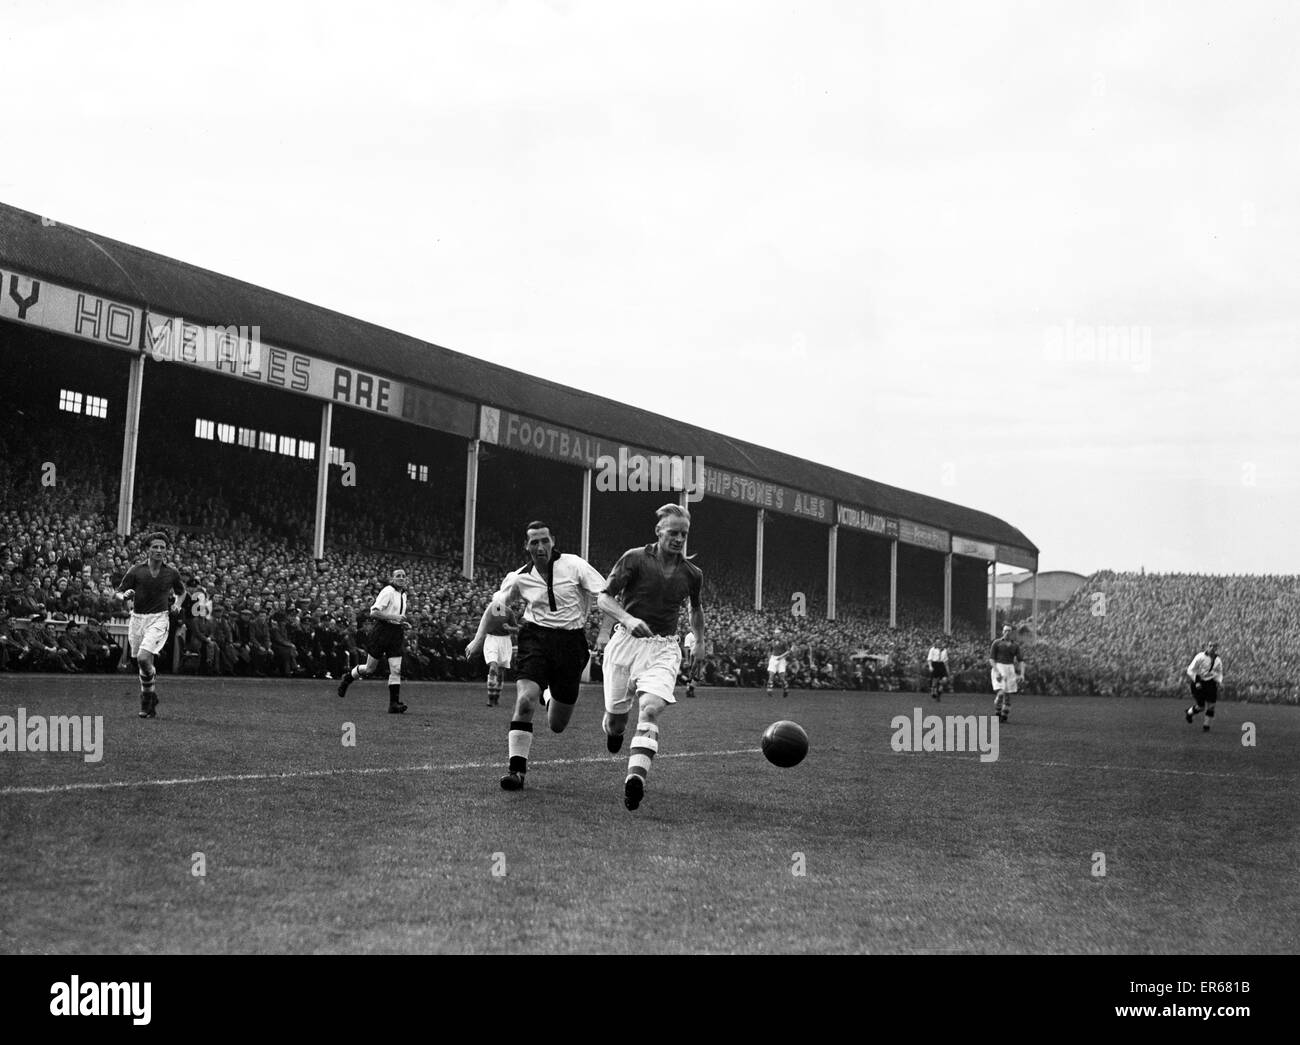 English League Division One match at Meadow Lane. Notts County 2 v Nottingham Forest 2. Tommy Lawton in action for Notts County. 15th September 1951. Stock Photo